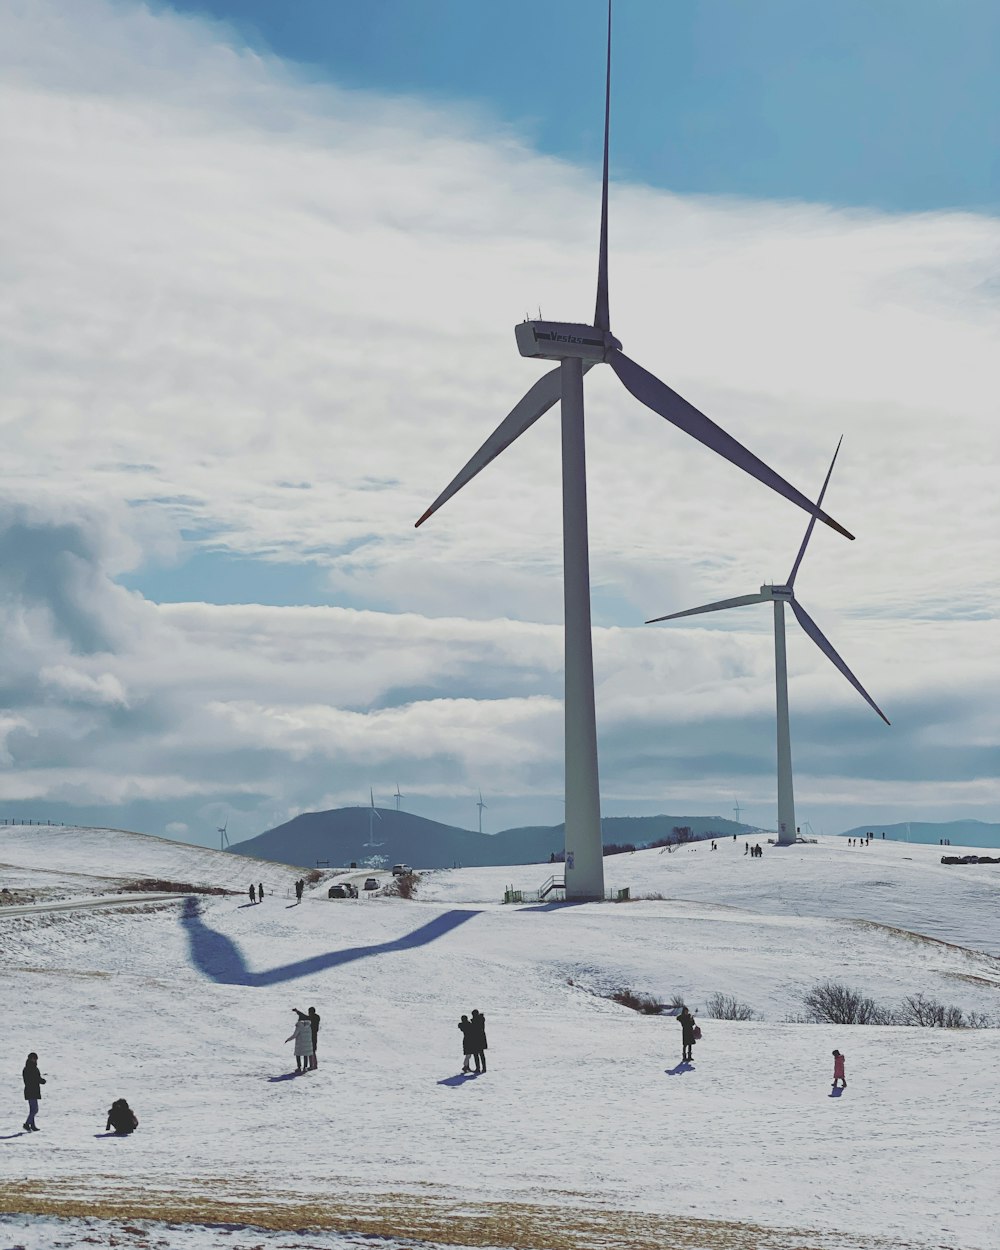 white wind turbine on snow covered ground under cloudy sky during daytime